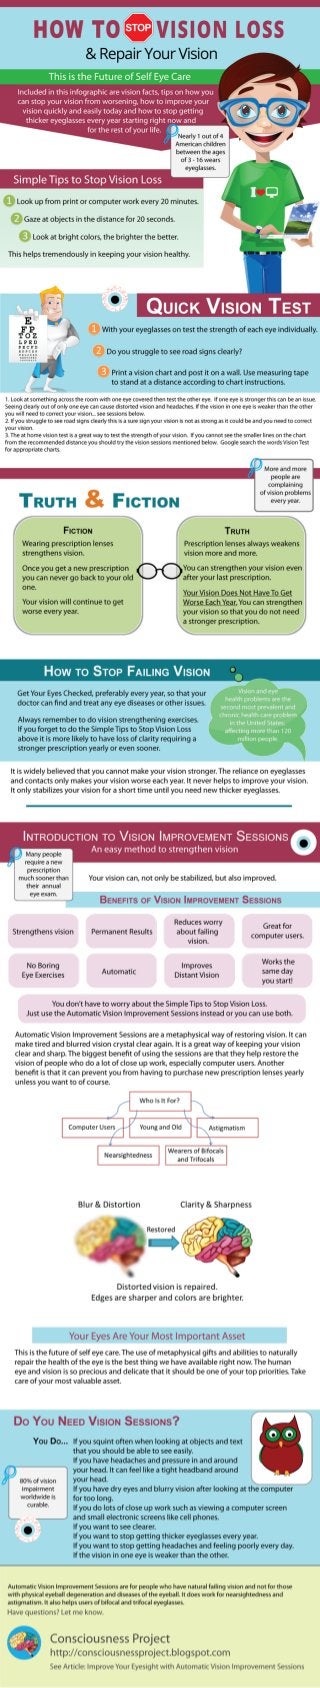 Improve your Vision Automatically - Vision Therapy Eye Exercises to Restore Your Vision